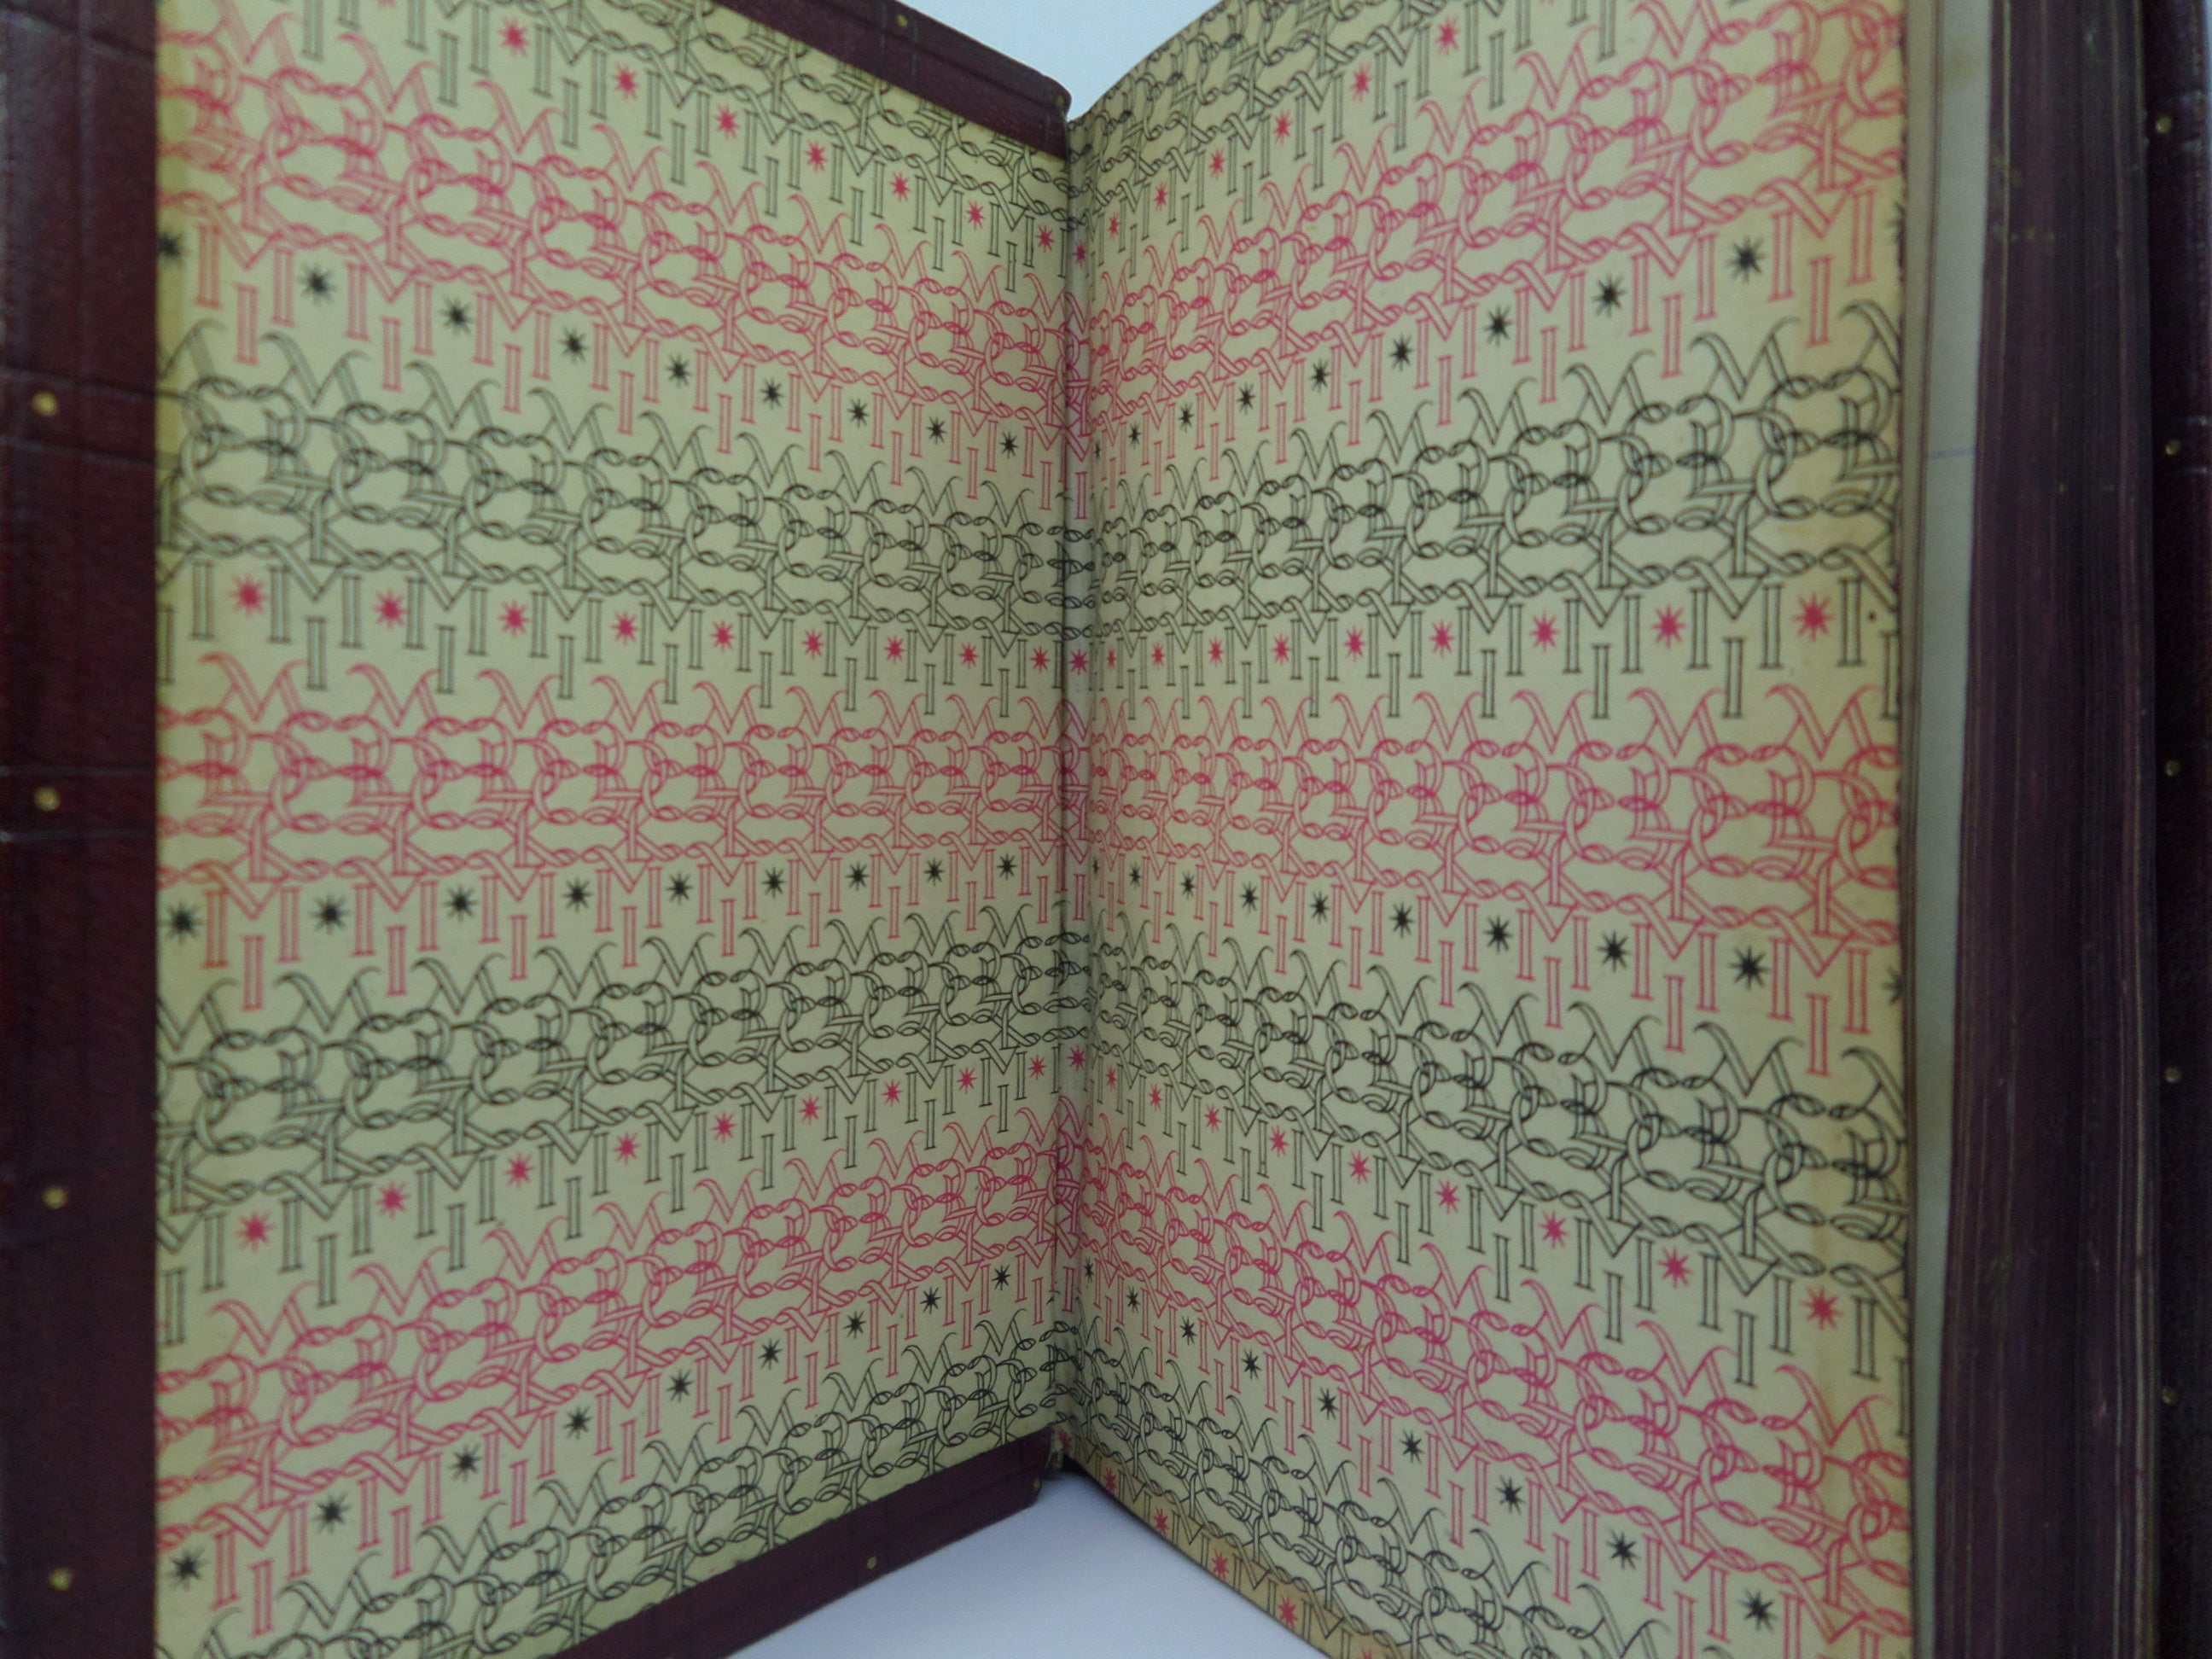 THE WORKS OF ALFRED LORD TENNYSON 1907 STUNNING ARTS AND CRAFTS BINDING